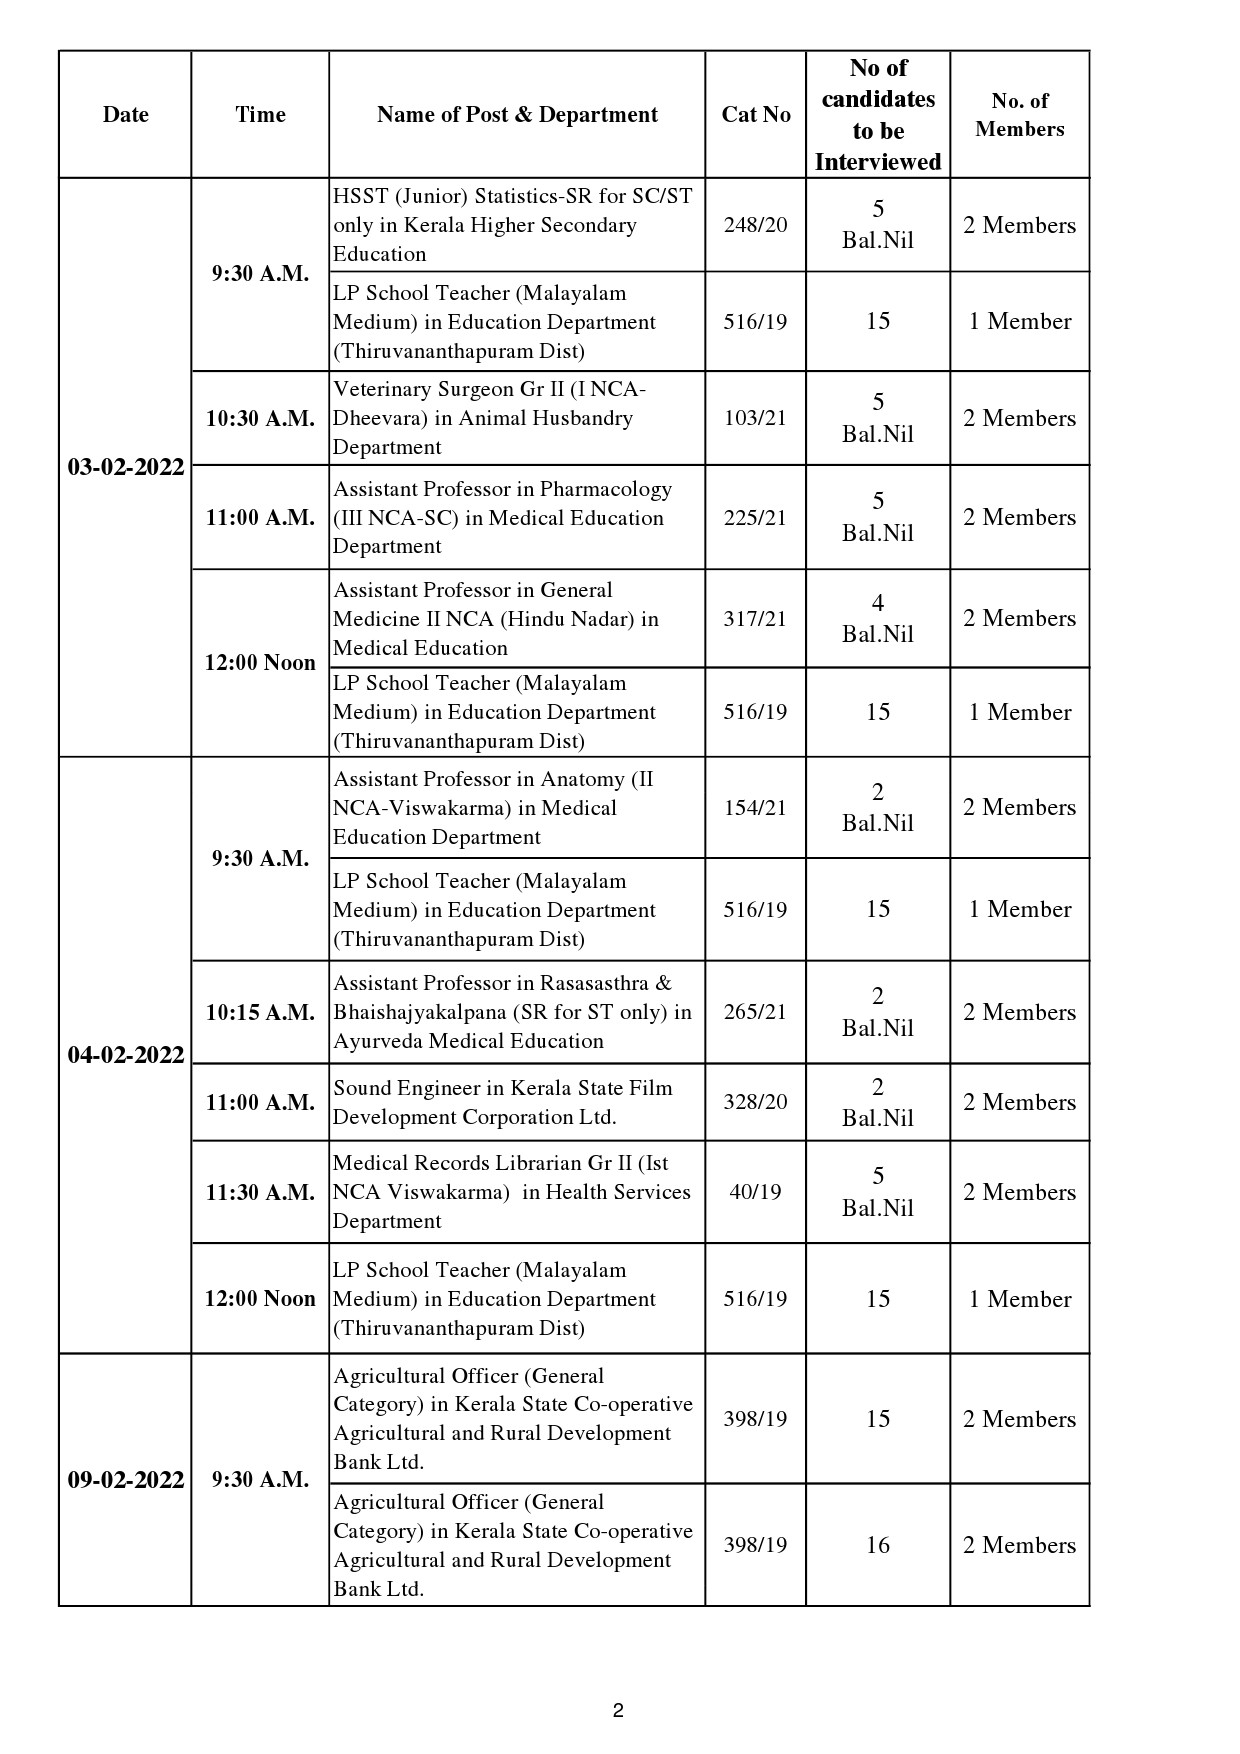 KPSC INTERVIEW PROGRAMME FOR THE MONTH OF FEBRUARY 2022 - Notification Image 2